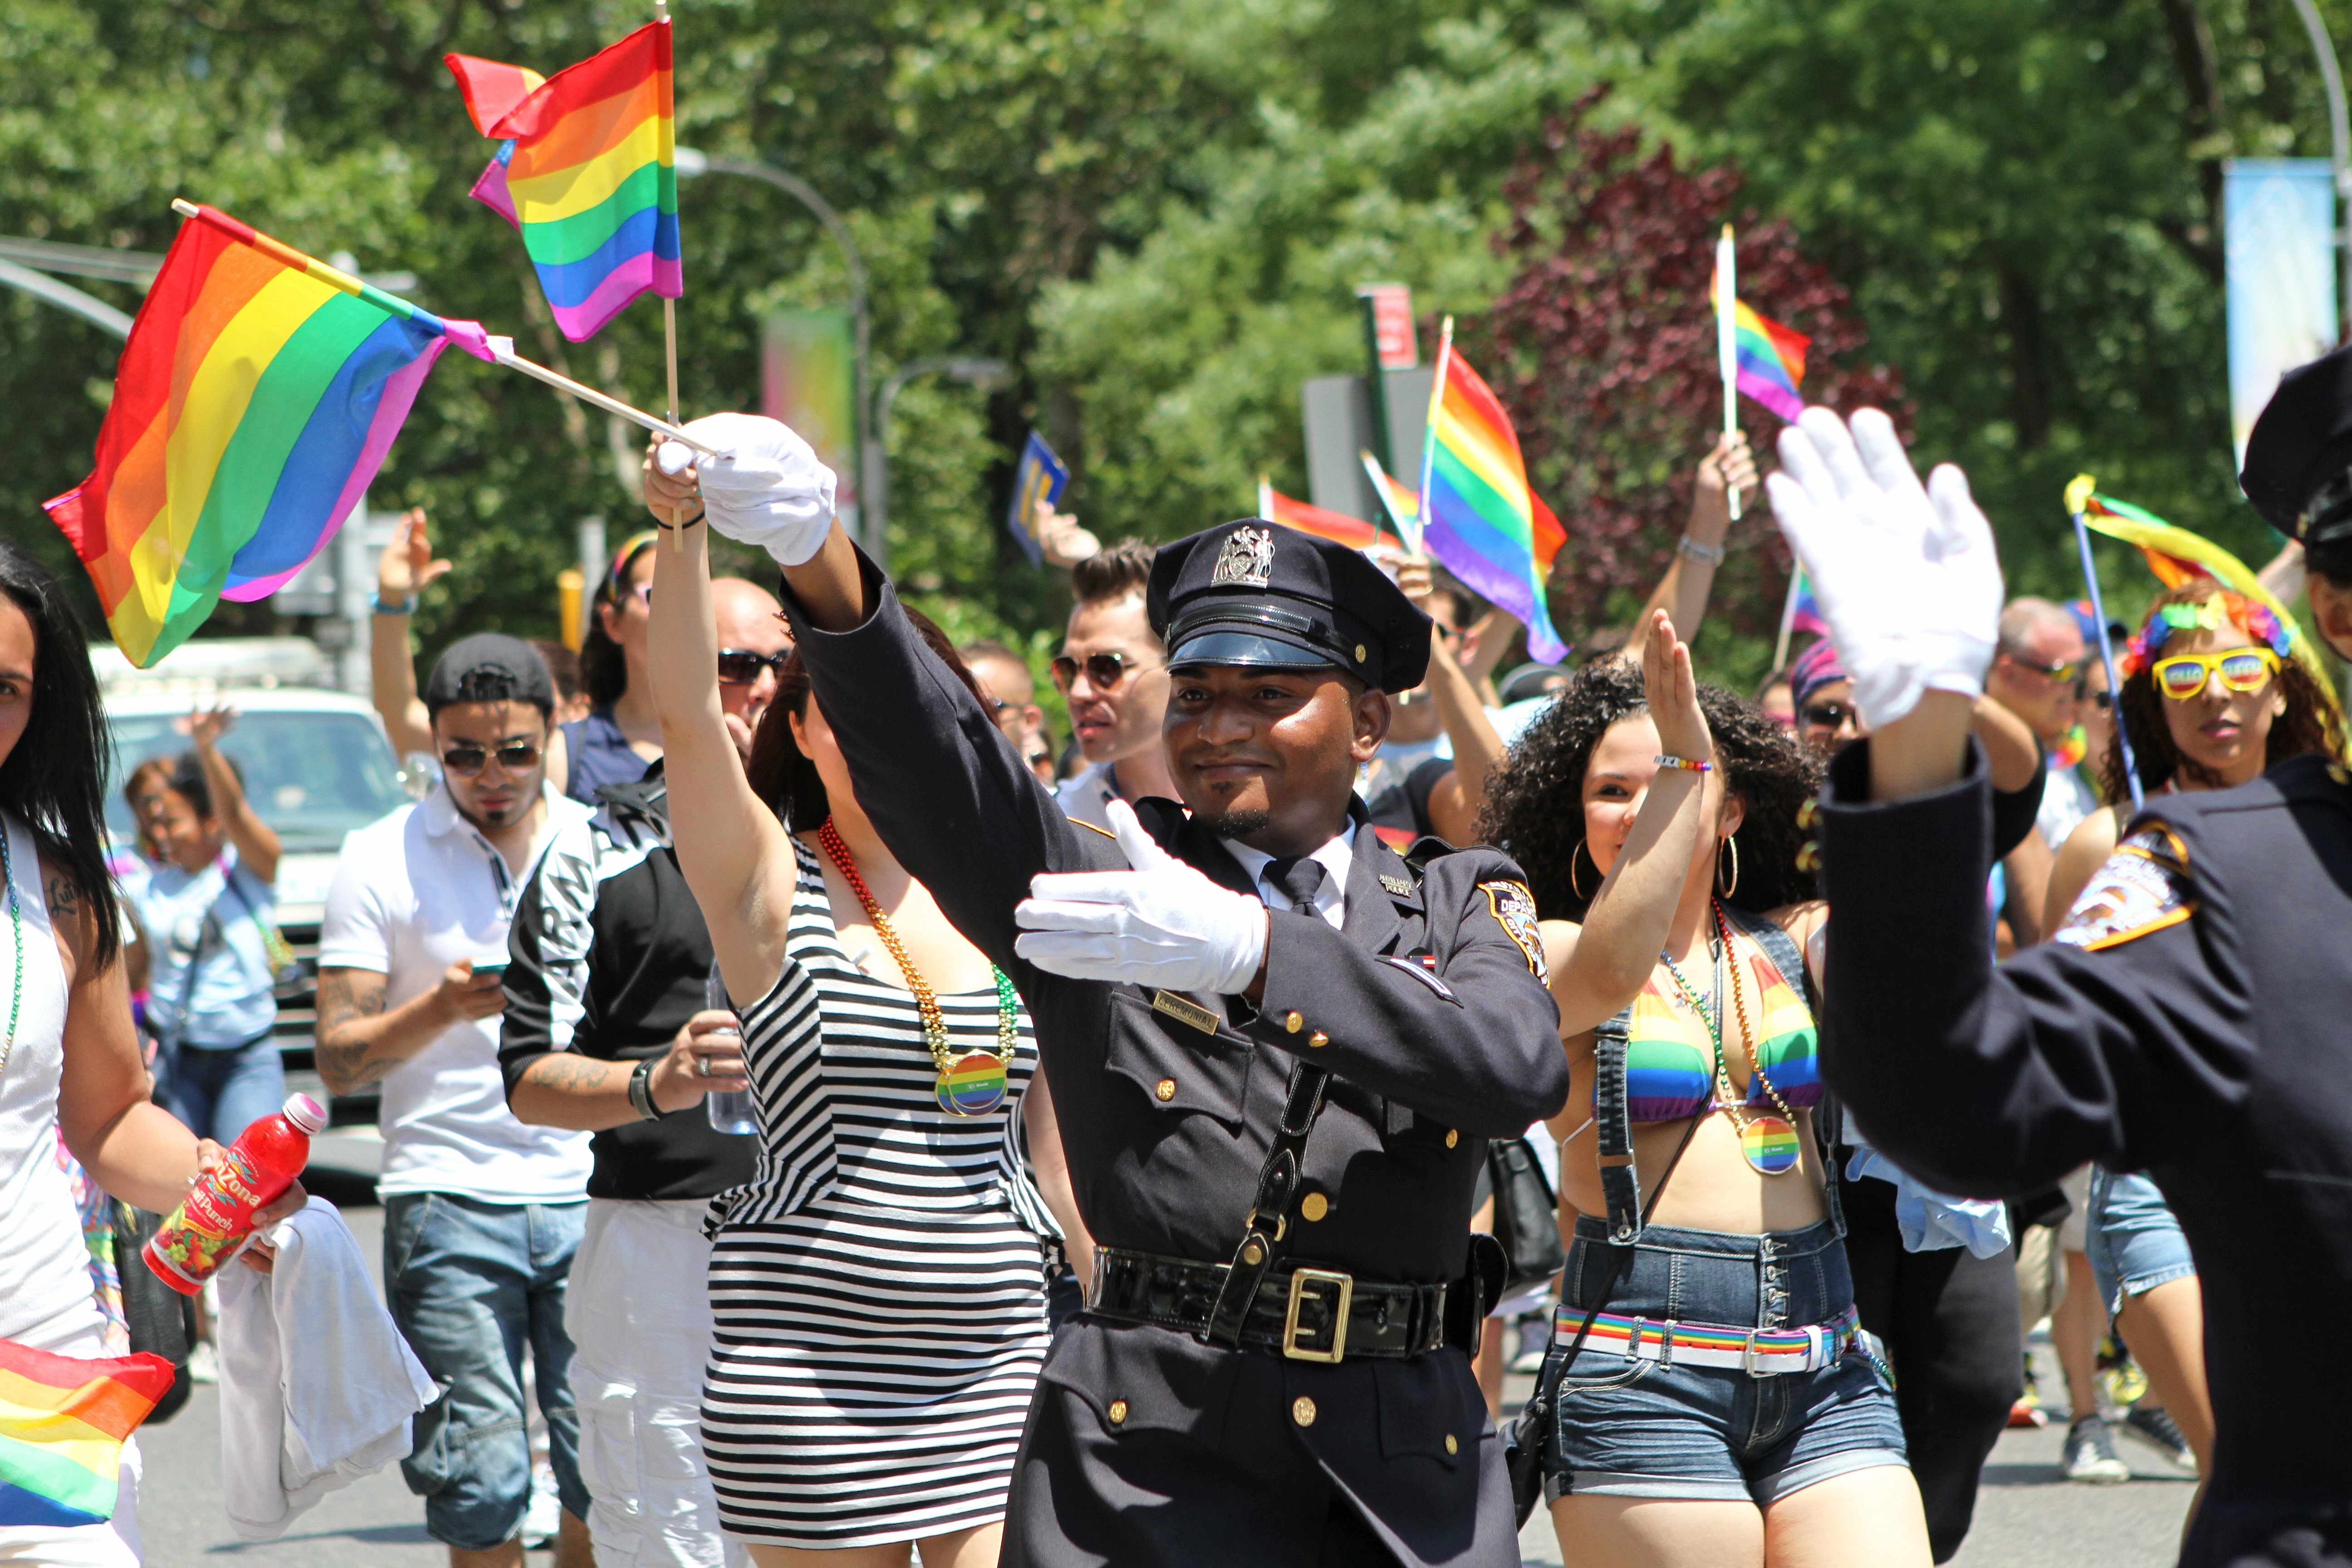 gay pride miami and impact on local events